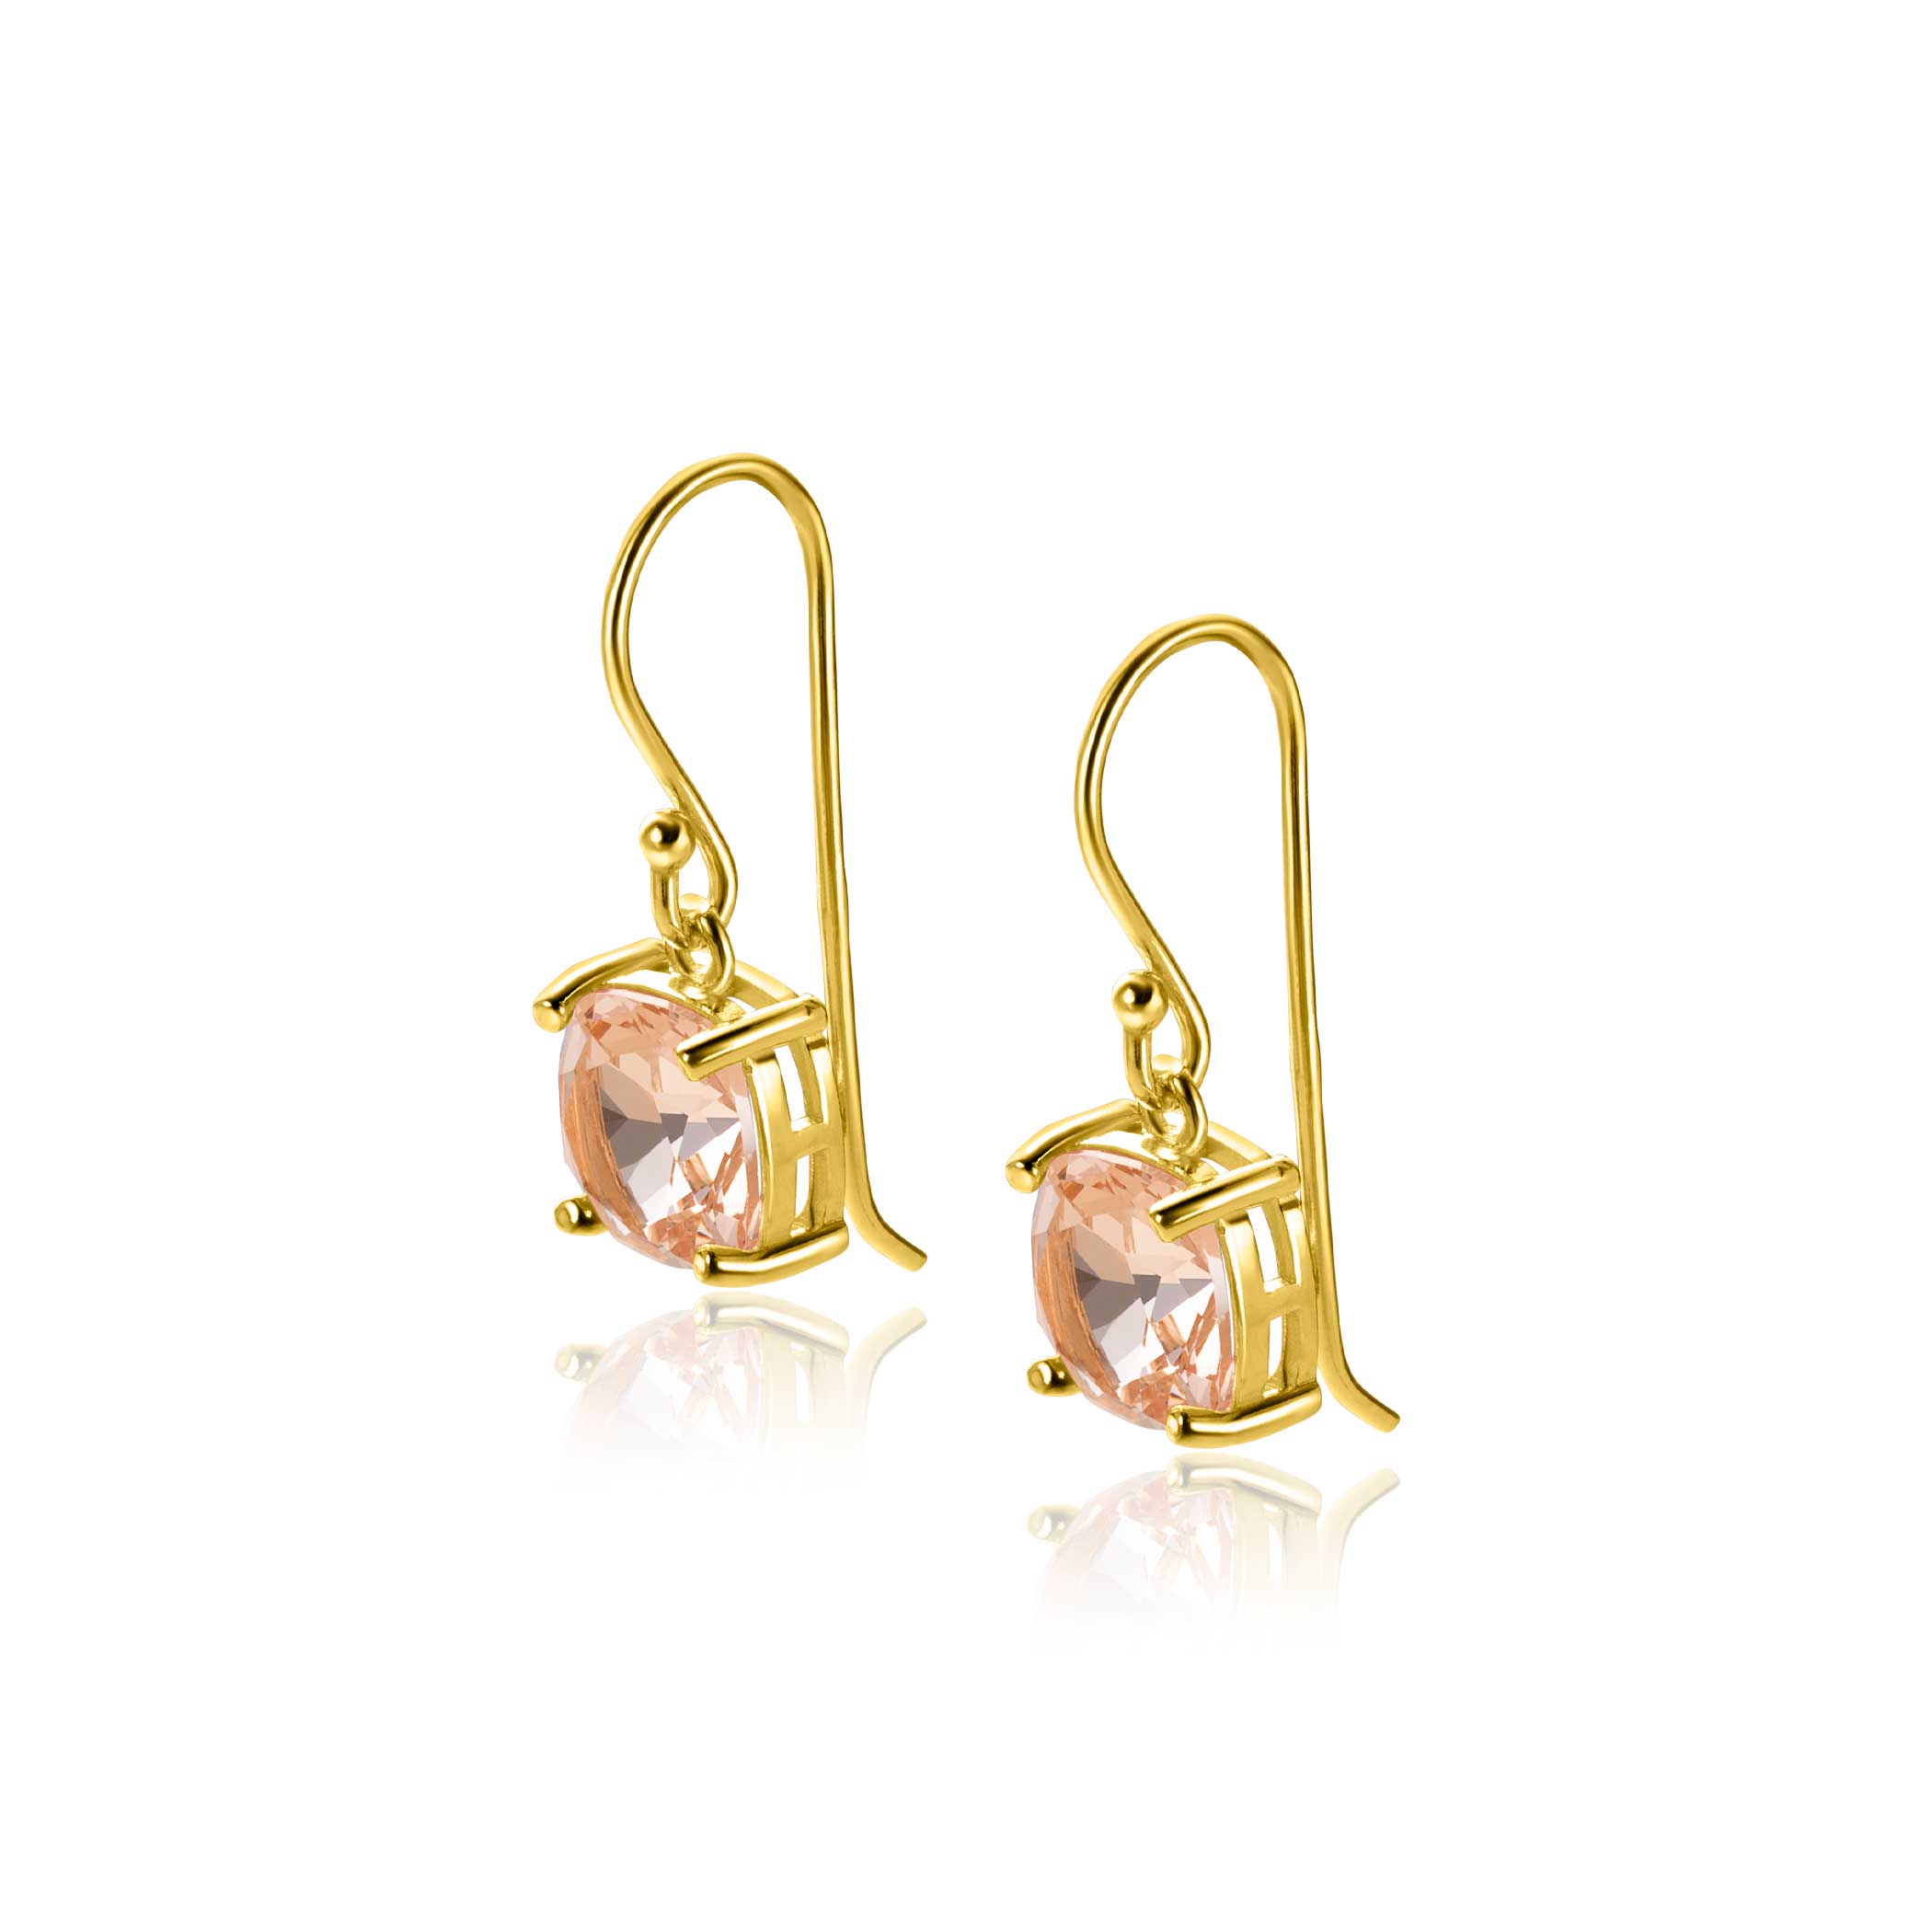 24mm ZINZI gold plated silver earrings with trendy square stone in light pink ZIO2579
